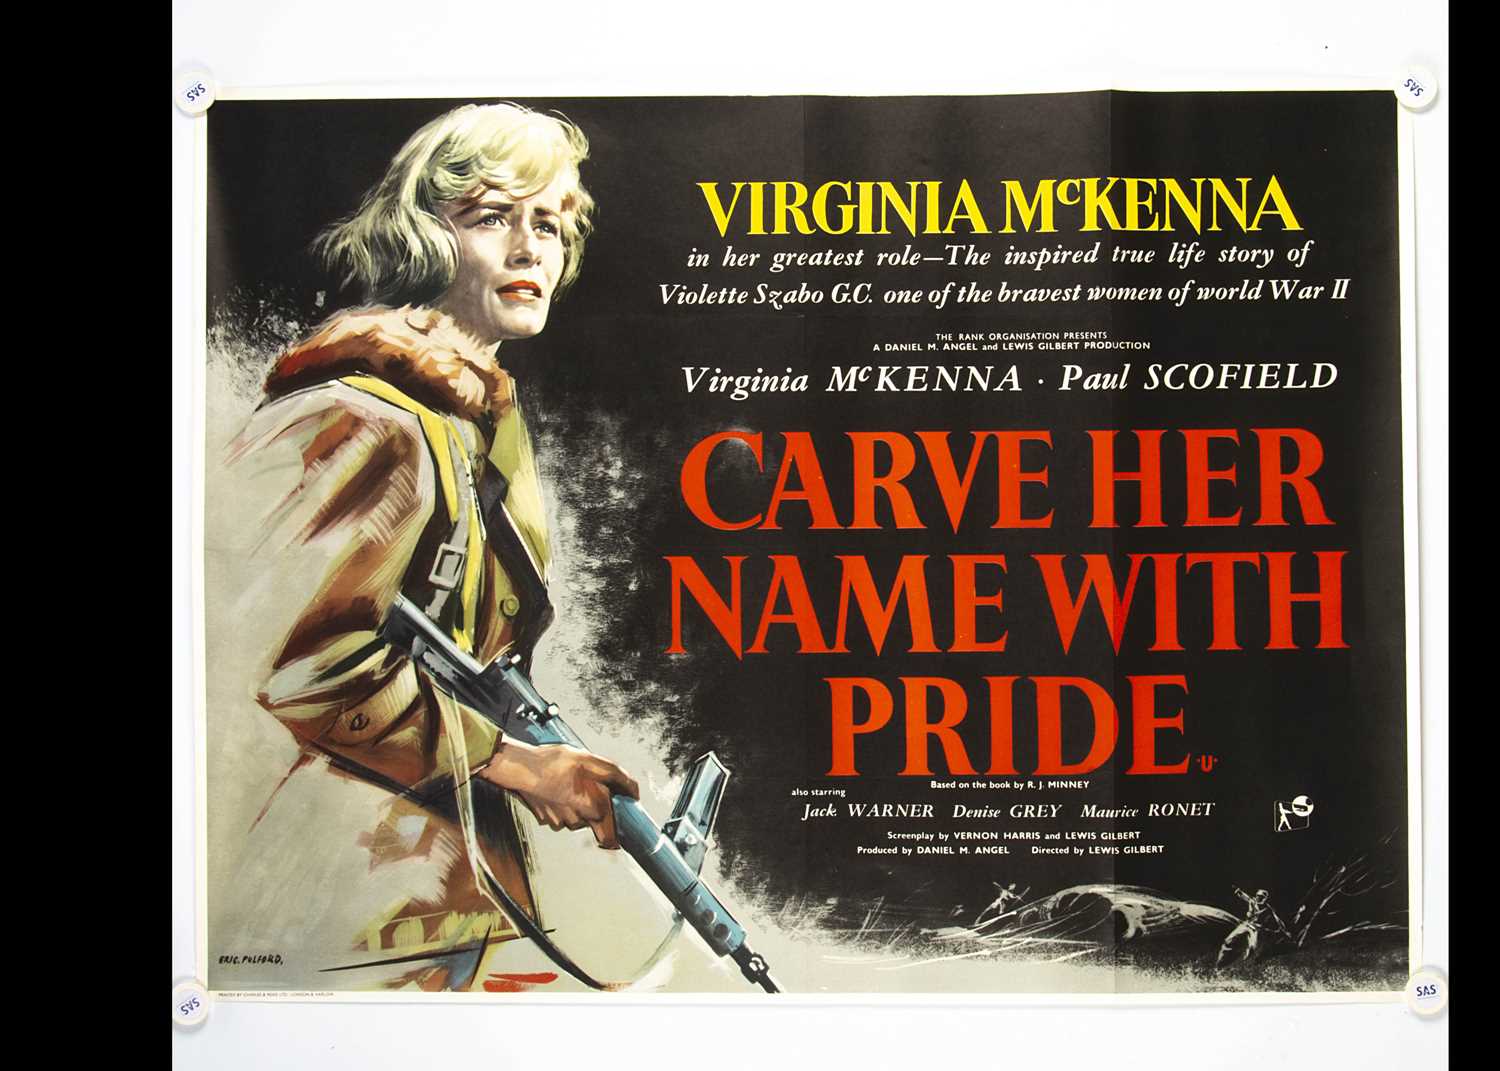 Lot 45 - Carve Her Name With Pride (1958) Quad Poster